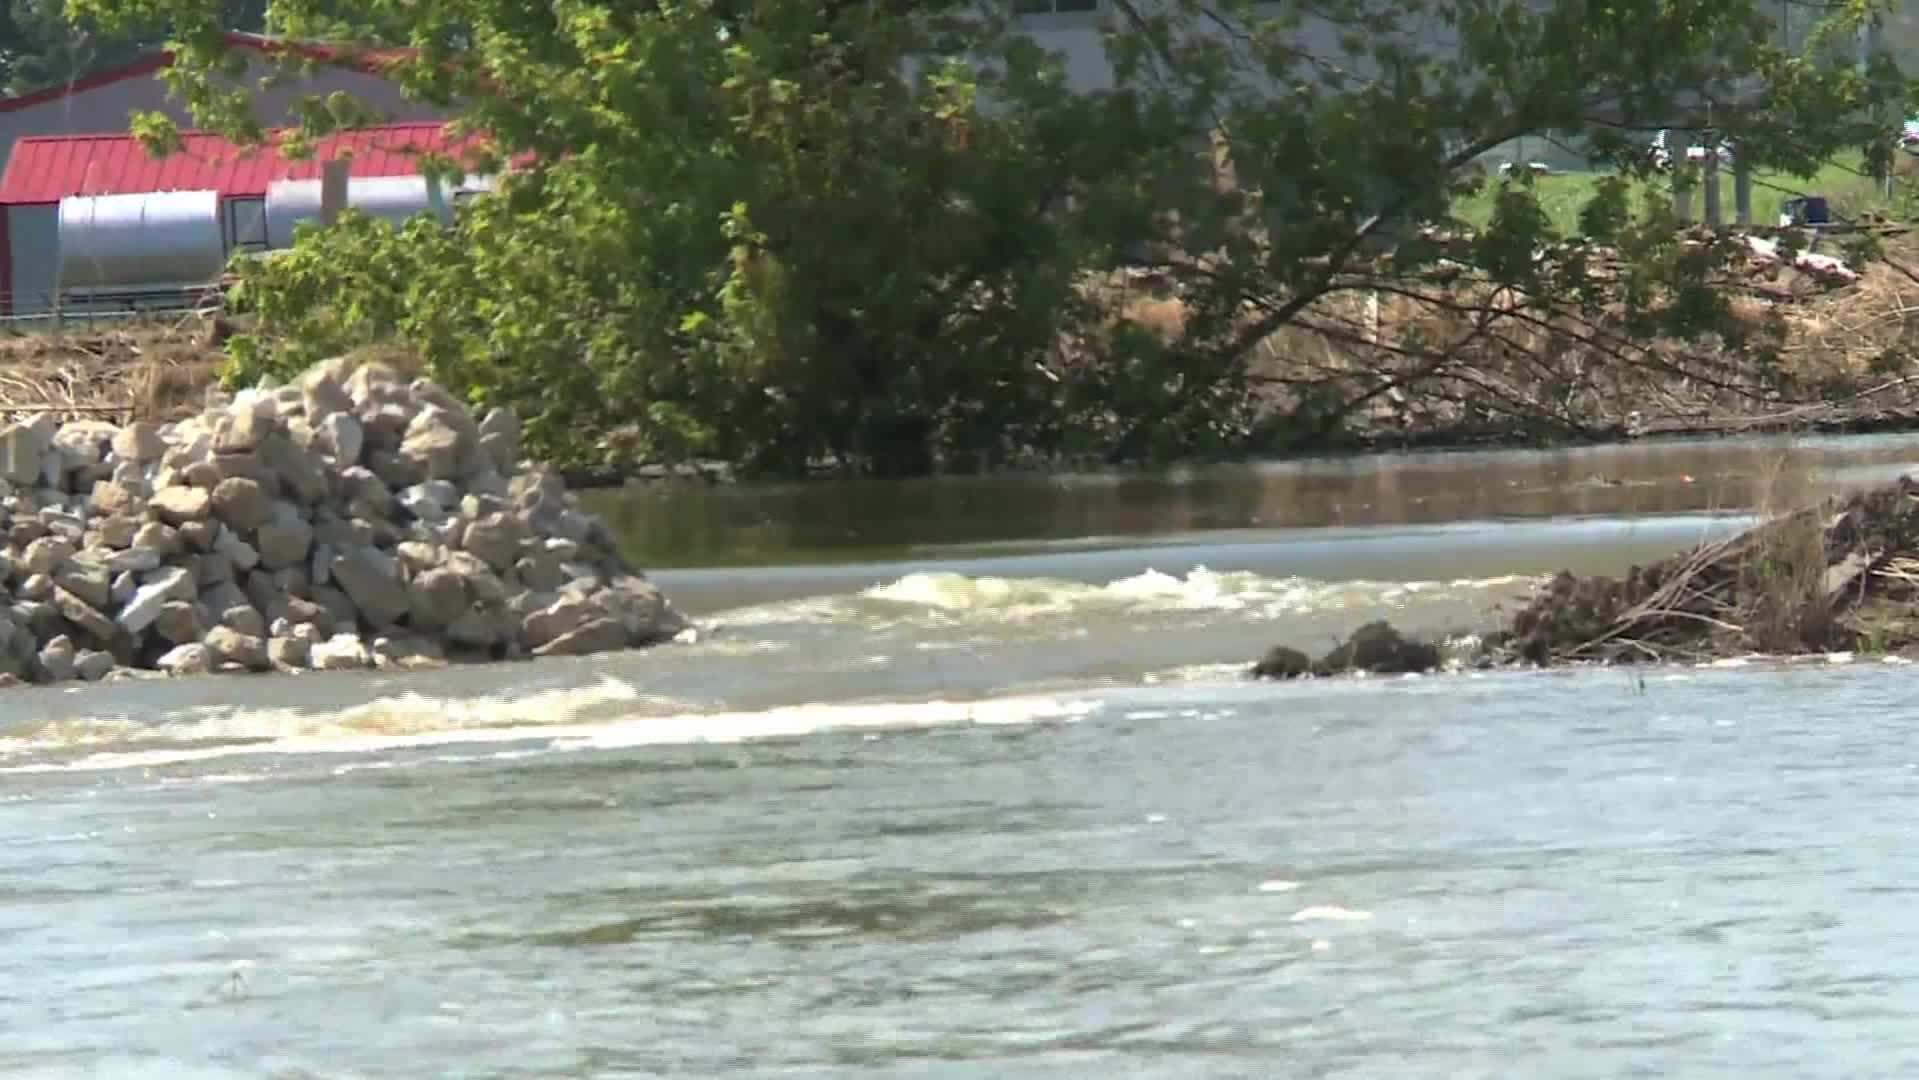 Water rushes down the Missouri River. If it rushes too quickly, it could knock out levees, said Eileen Williamson of the US Army Corps of Engineers.